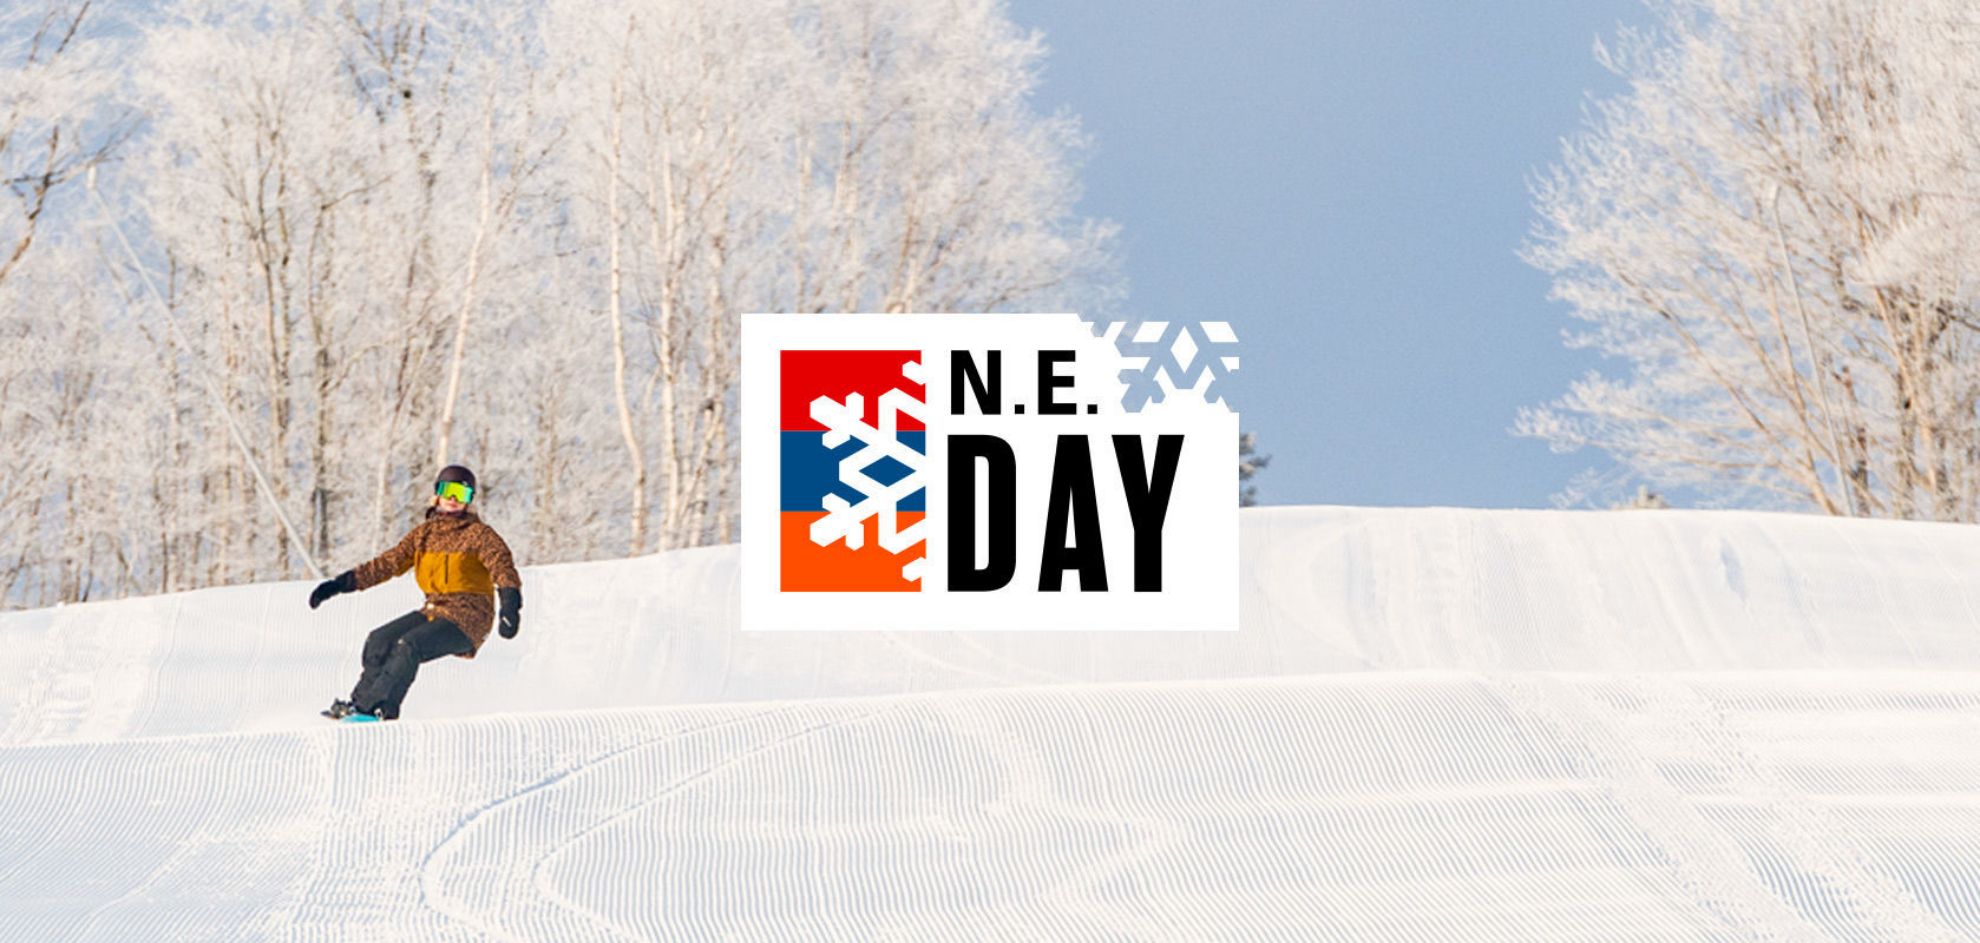 Women on snowboard carving a turn; N.E. Day logo graphic over image